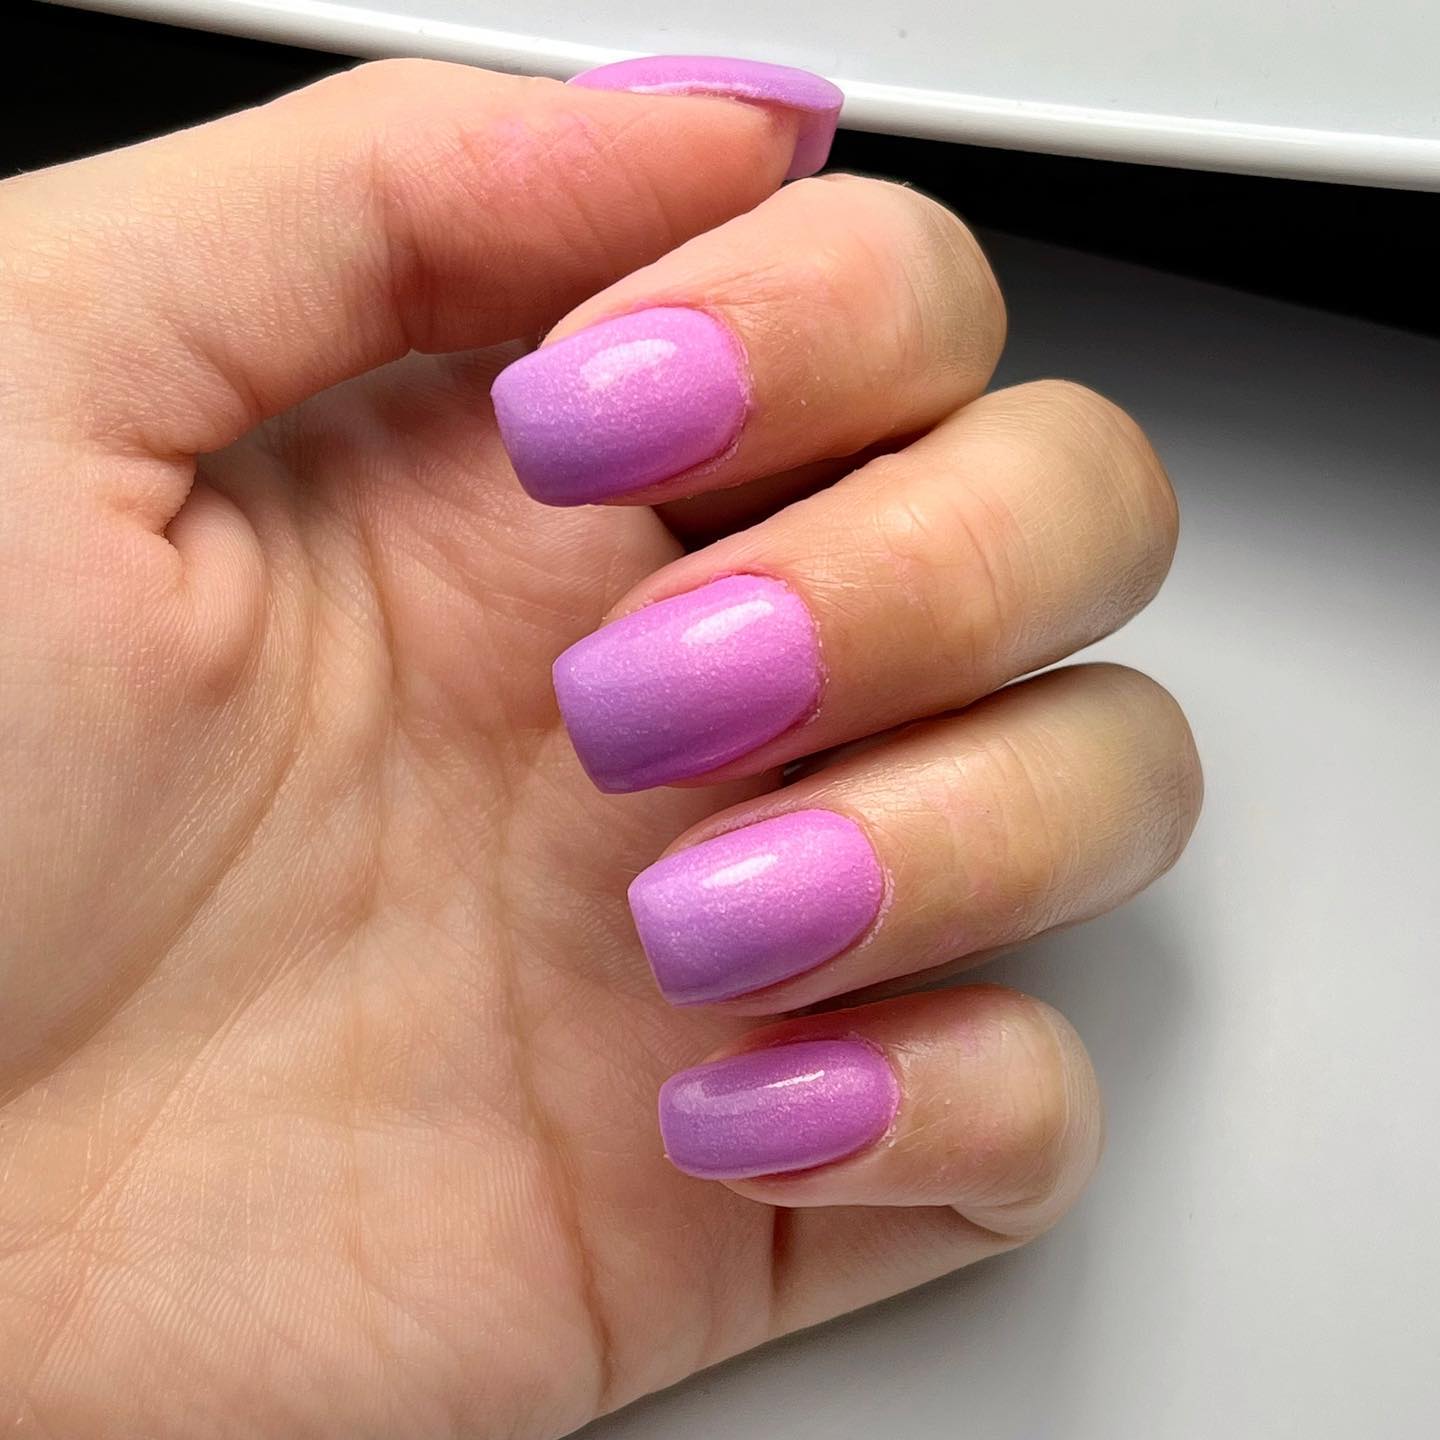 Have you ever seen a cute ombre nail like this? Purple lovers will adore it. A darker shade of purple is on the nail tips and it gives a great look.